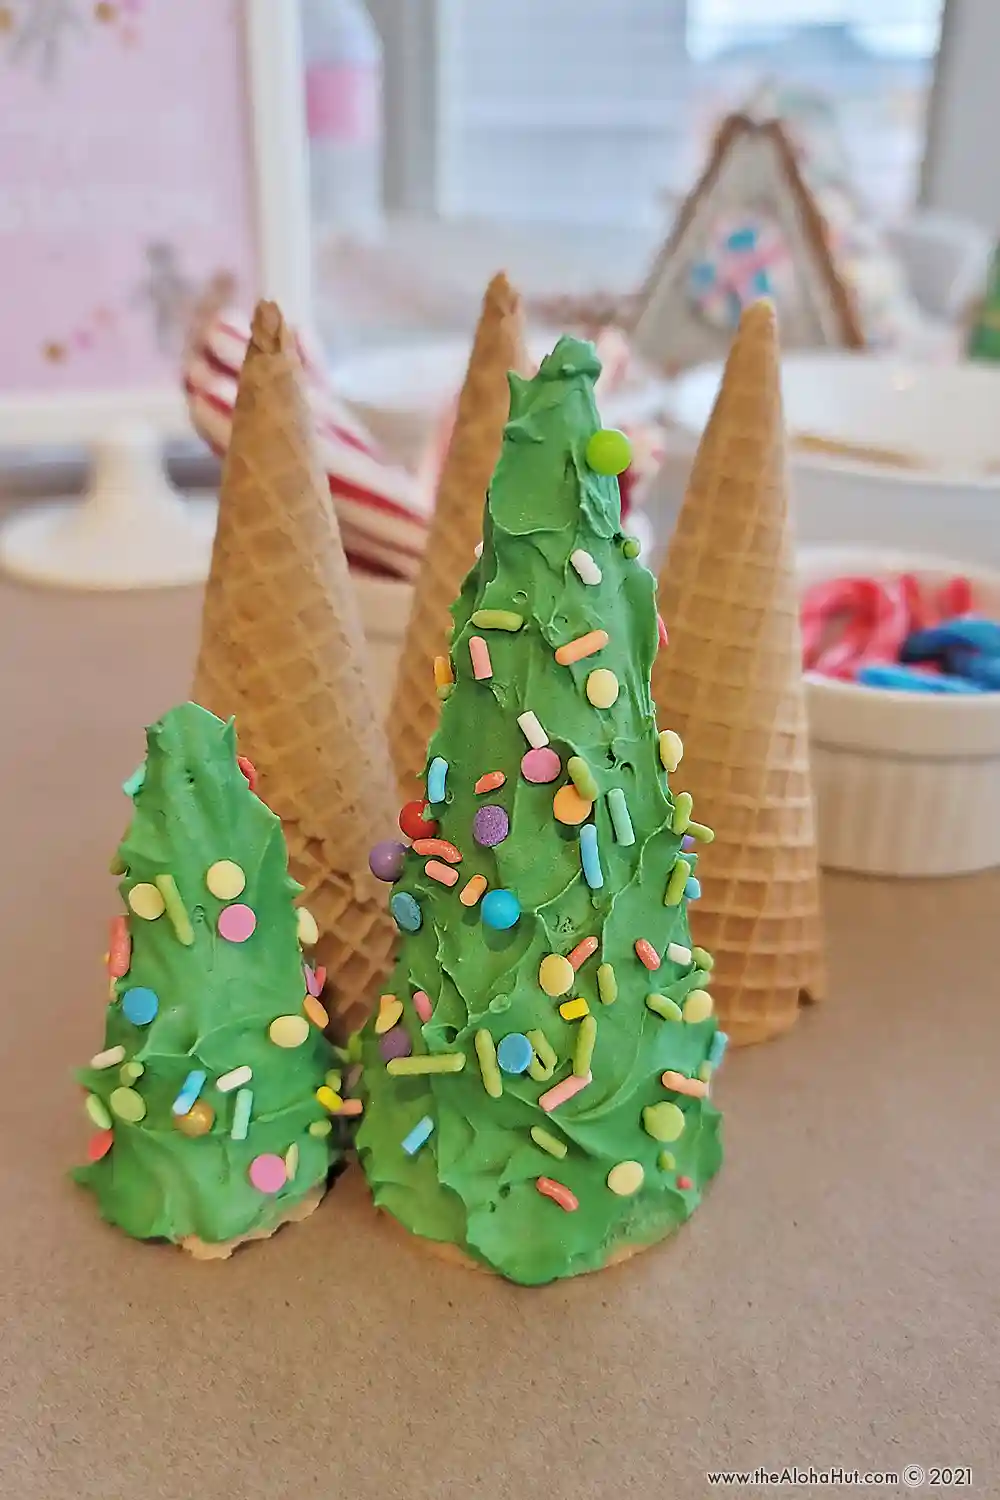 Gingerbread Christmas Party - How to Host - free printable decor - ice cream cone trees